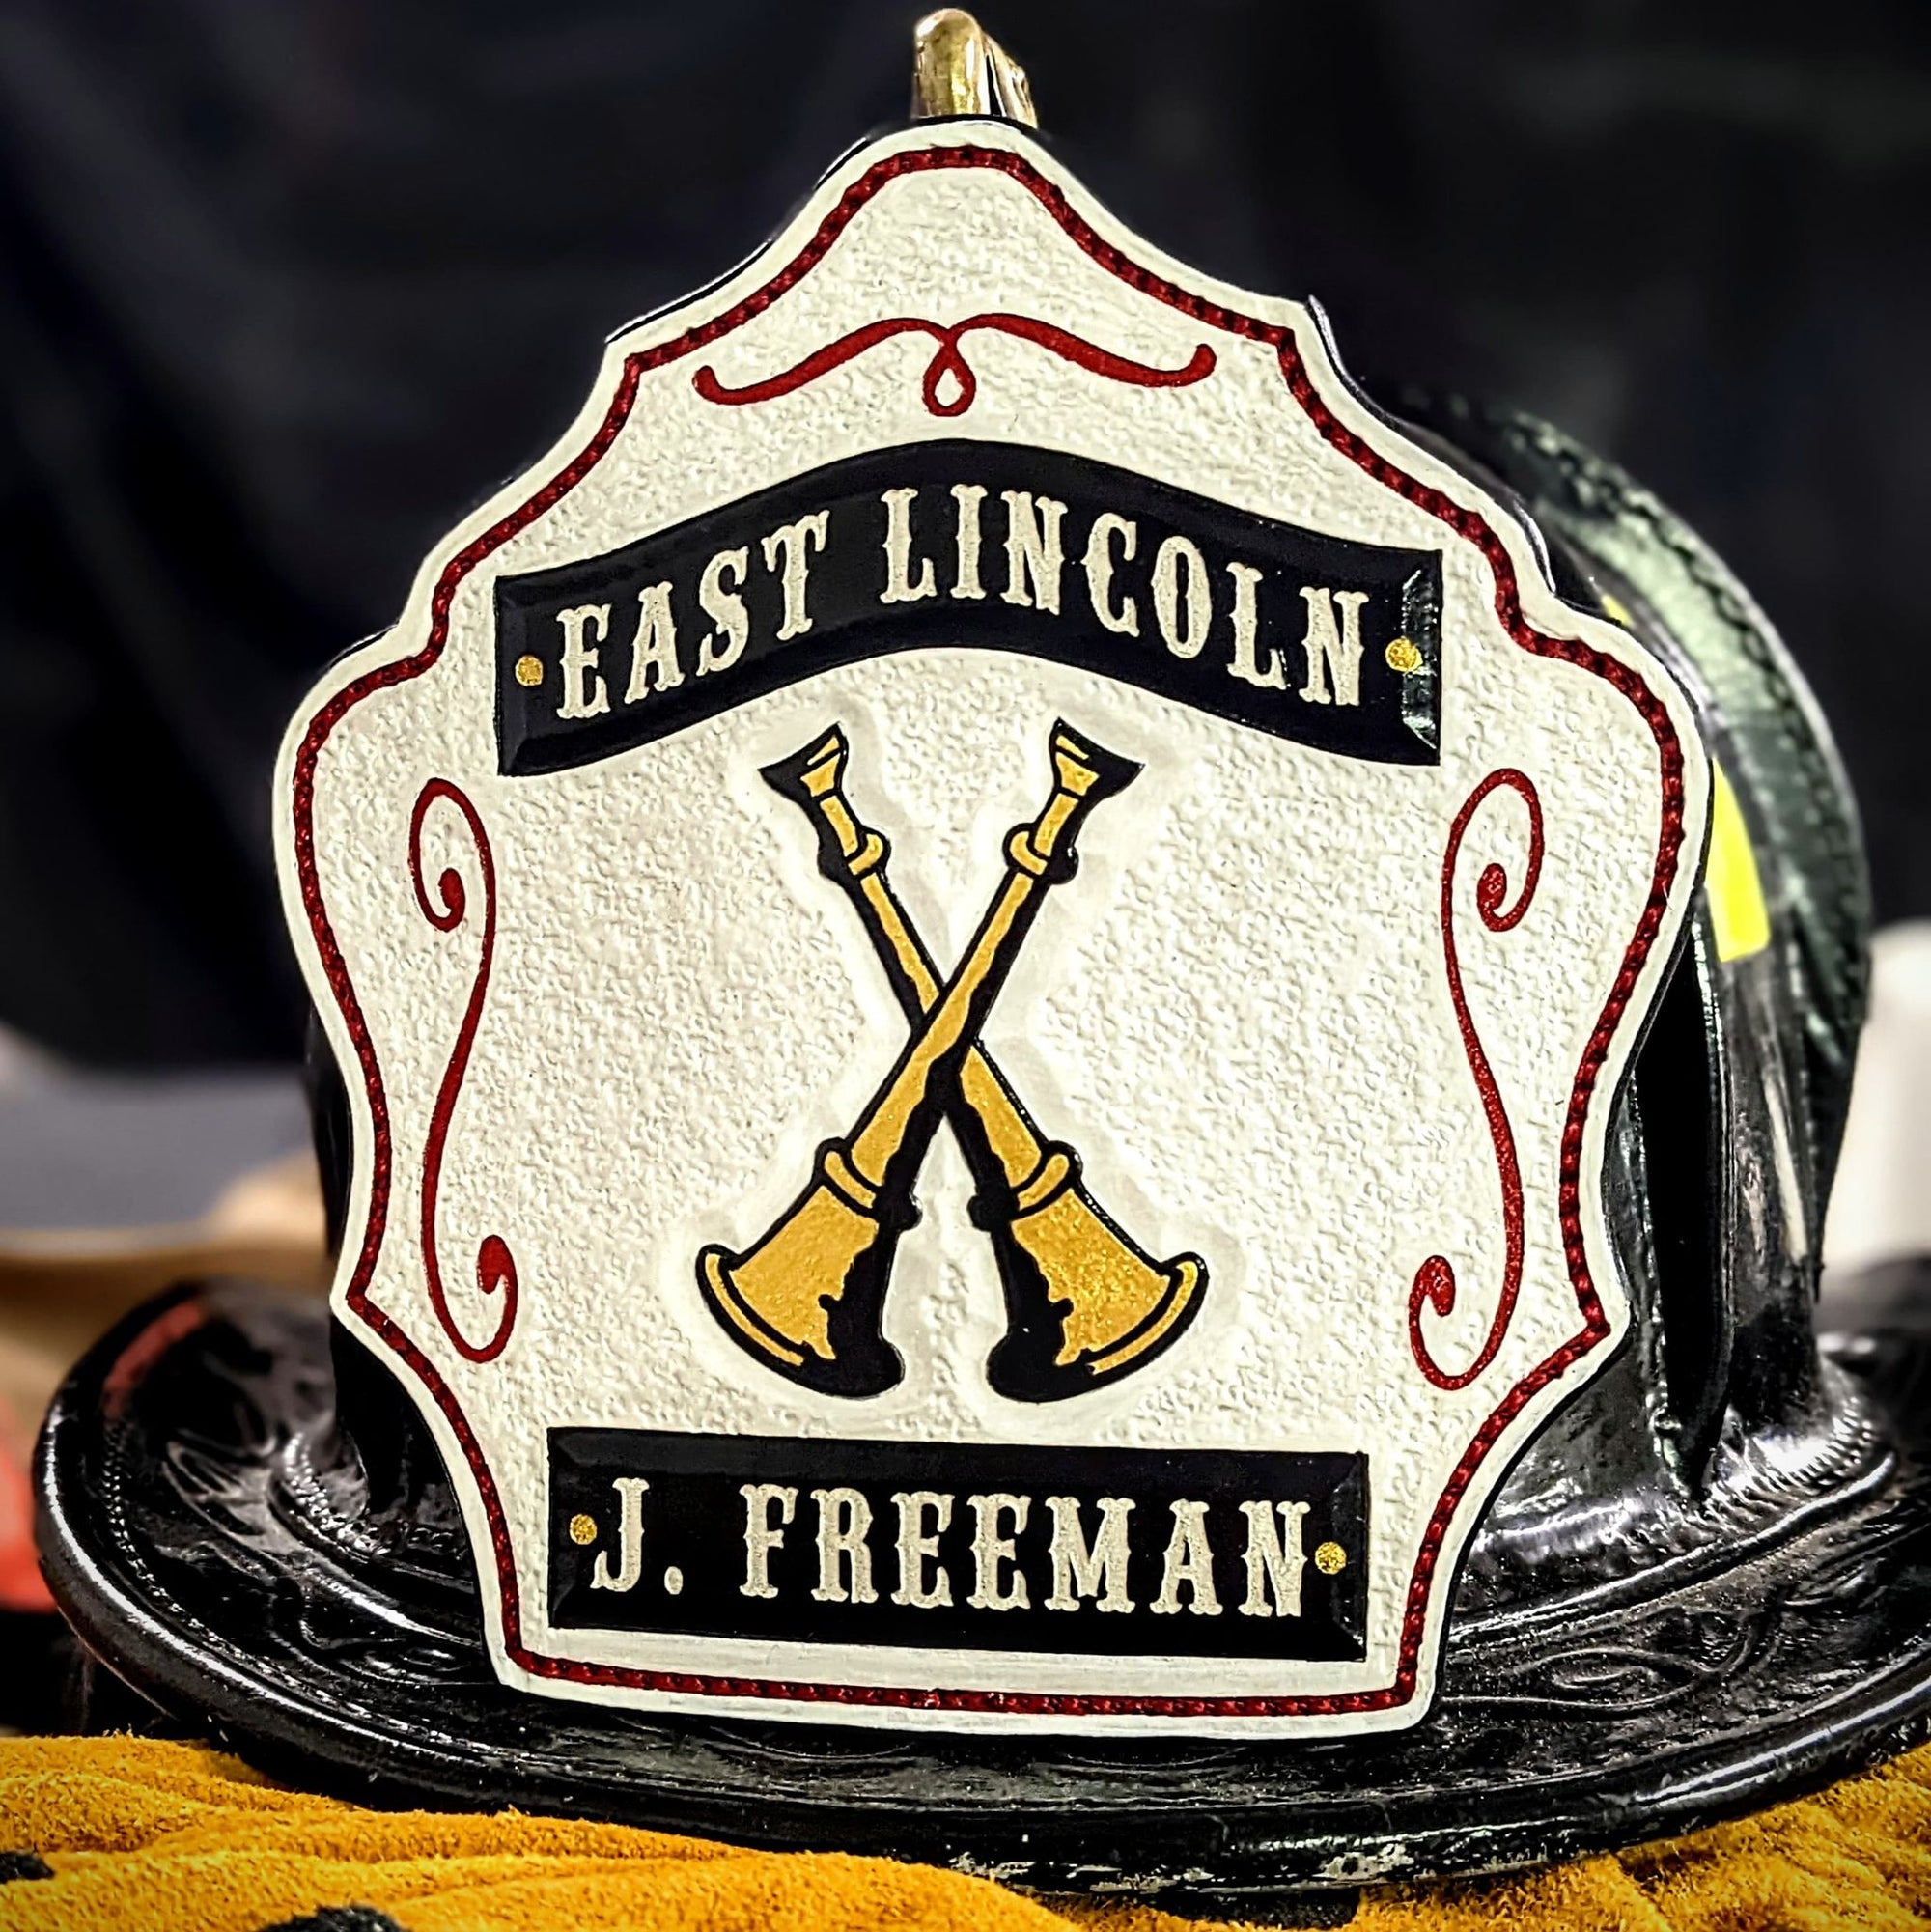 Custom genuine leather fire helmet front, Custom helmet front, custom leather helmet shield, custom leather, firefighter, first responders, fire gear, helmet front, custom leather helmet shield, fire helmet